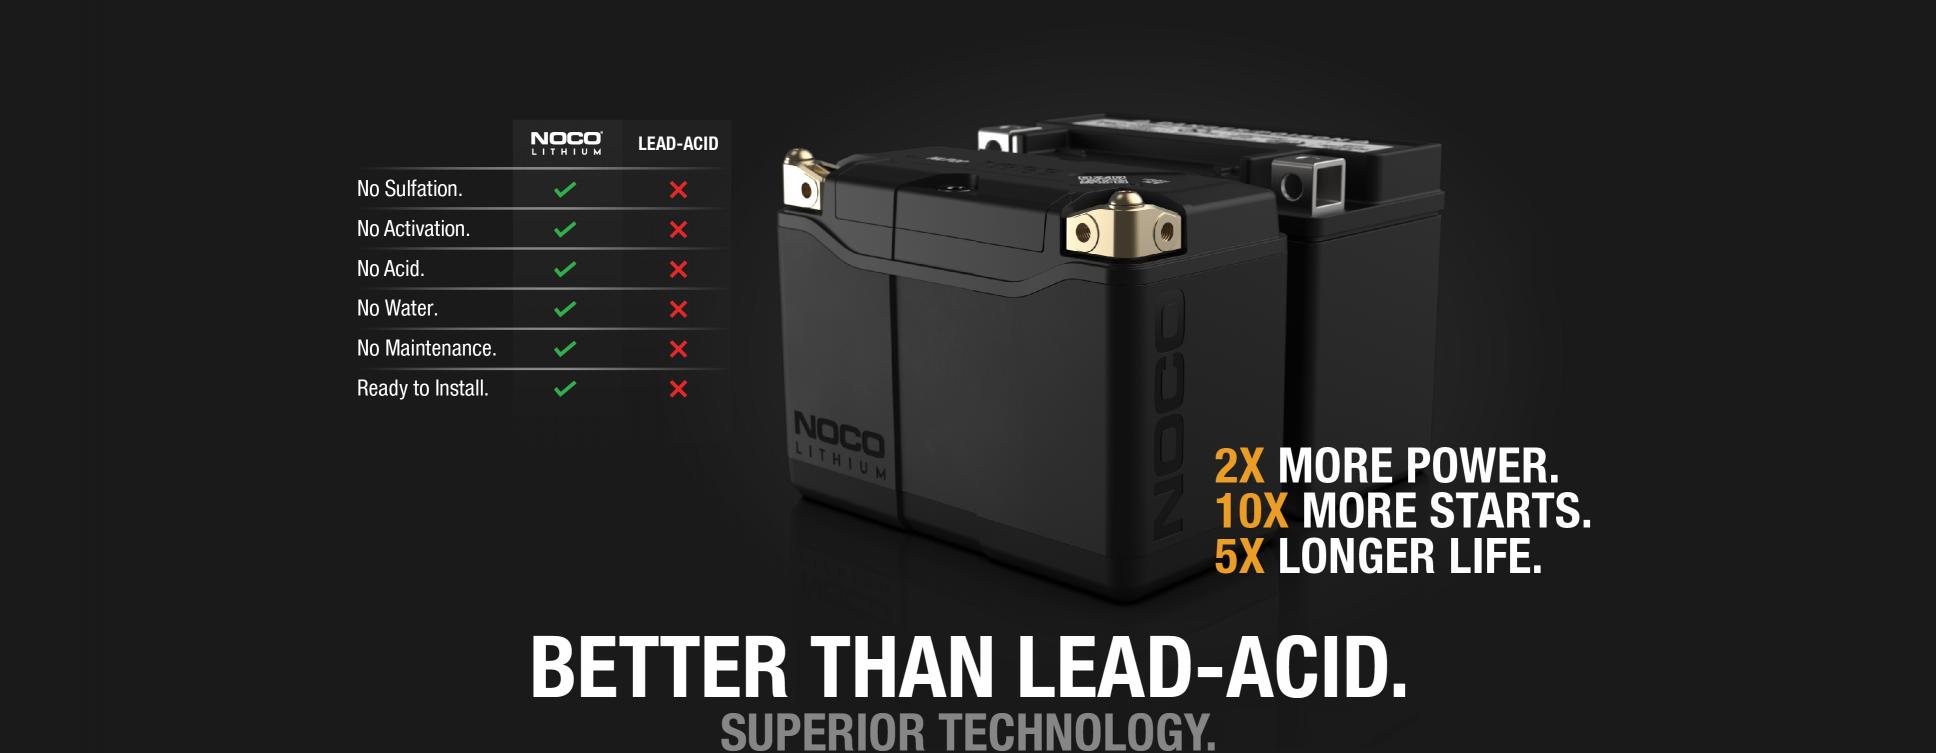 Noco NLP20 is the most highly-designed and engineered lithium powersports battery series ever. It's better than lead-acid powersports batteries in almost every way - no sulfation, no activation, no acid, no maintenance, and no water needed.